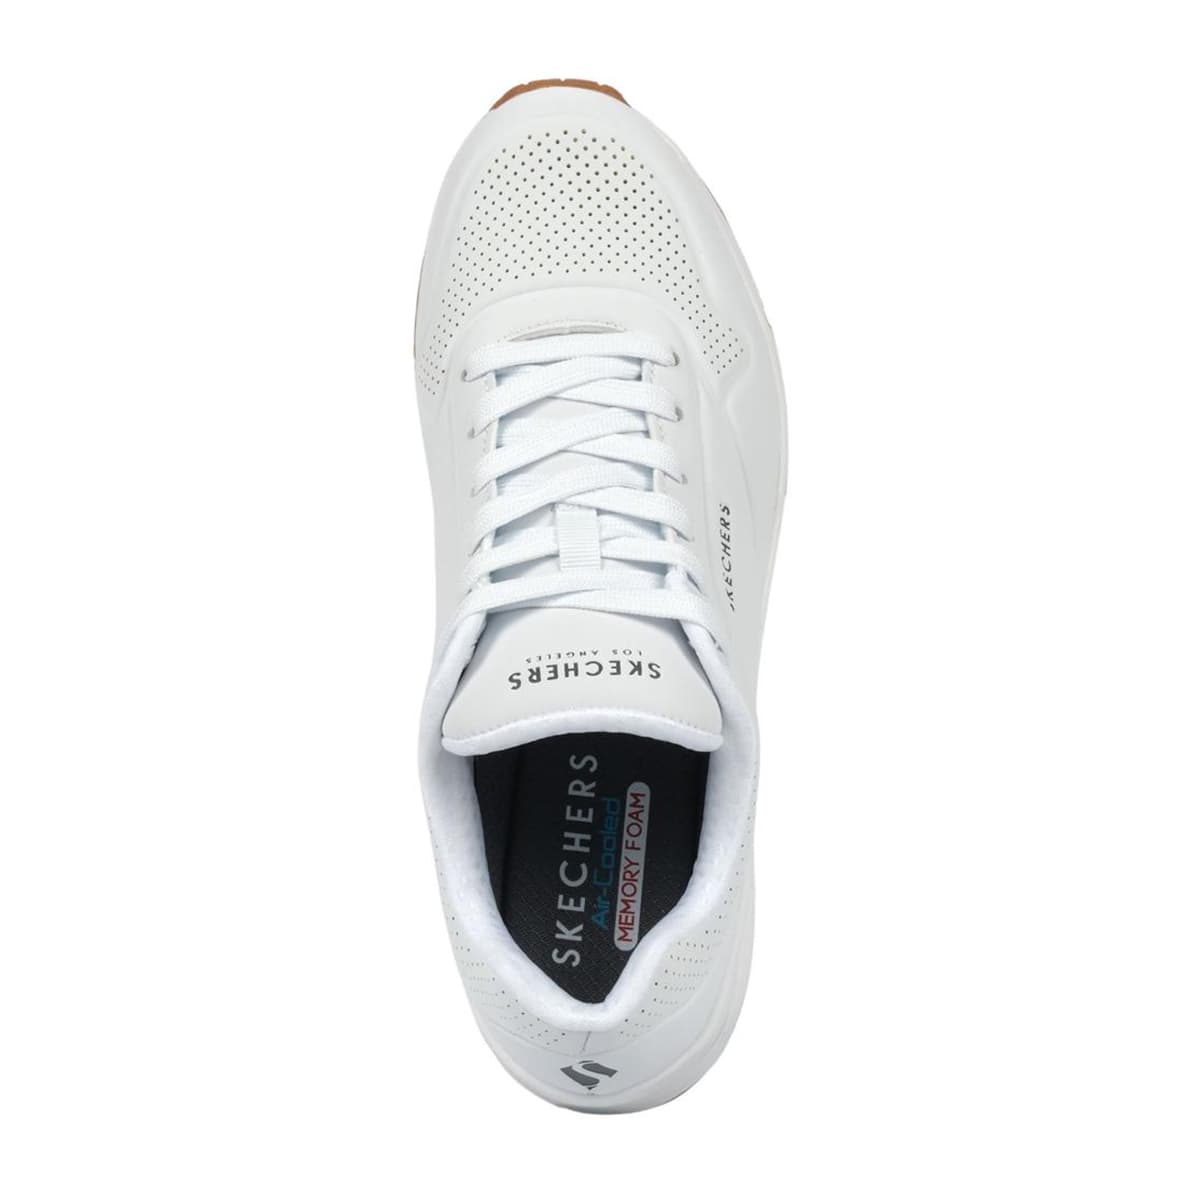 Skechers Uno - Stand On Air Beyaz Sneakers (52458 WHT)